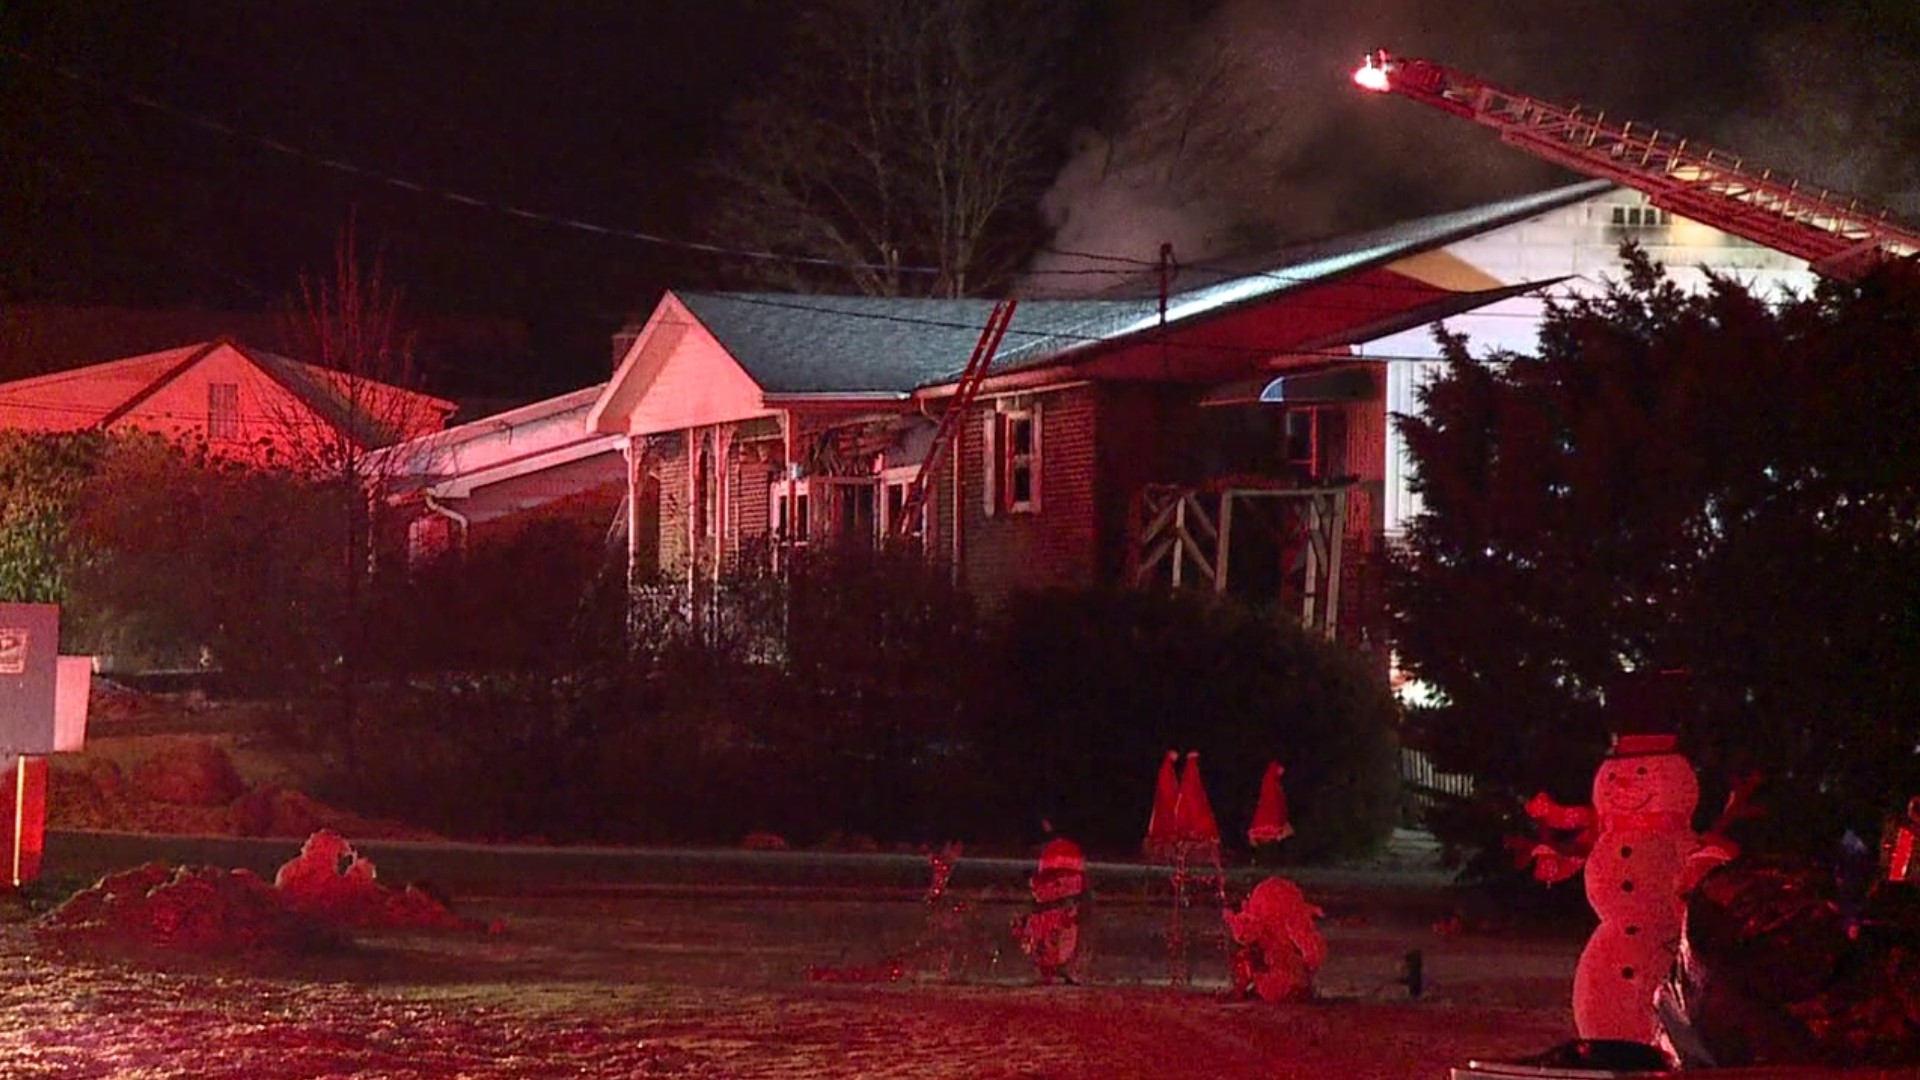 A fire damaged a house early Christmas Day along Pardeesville Road in Hazle Township.